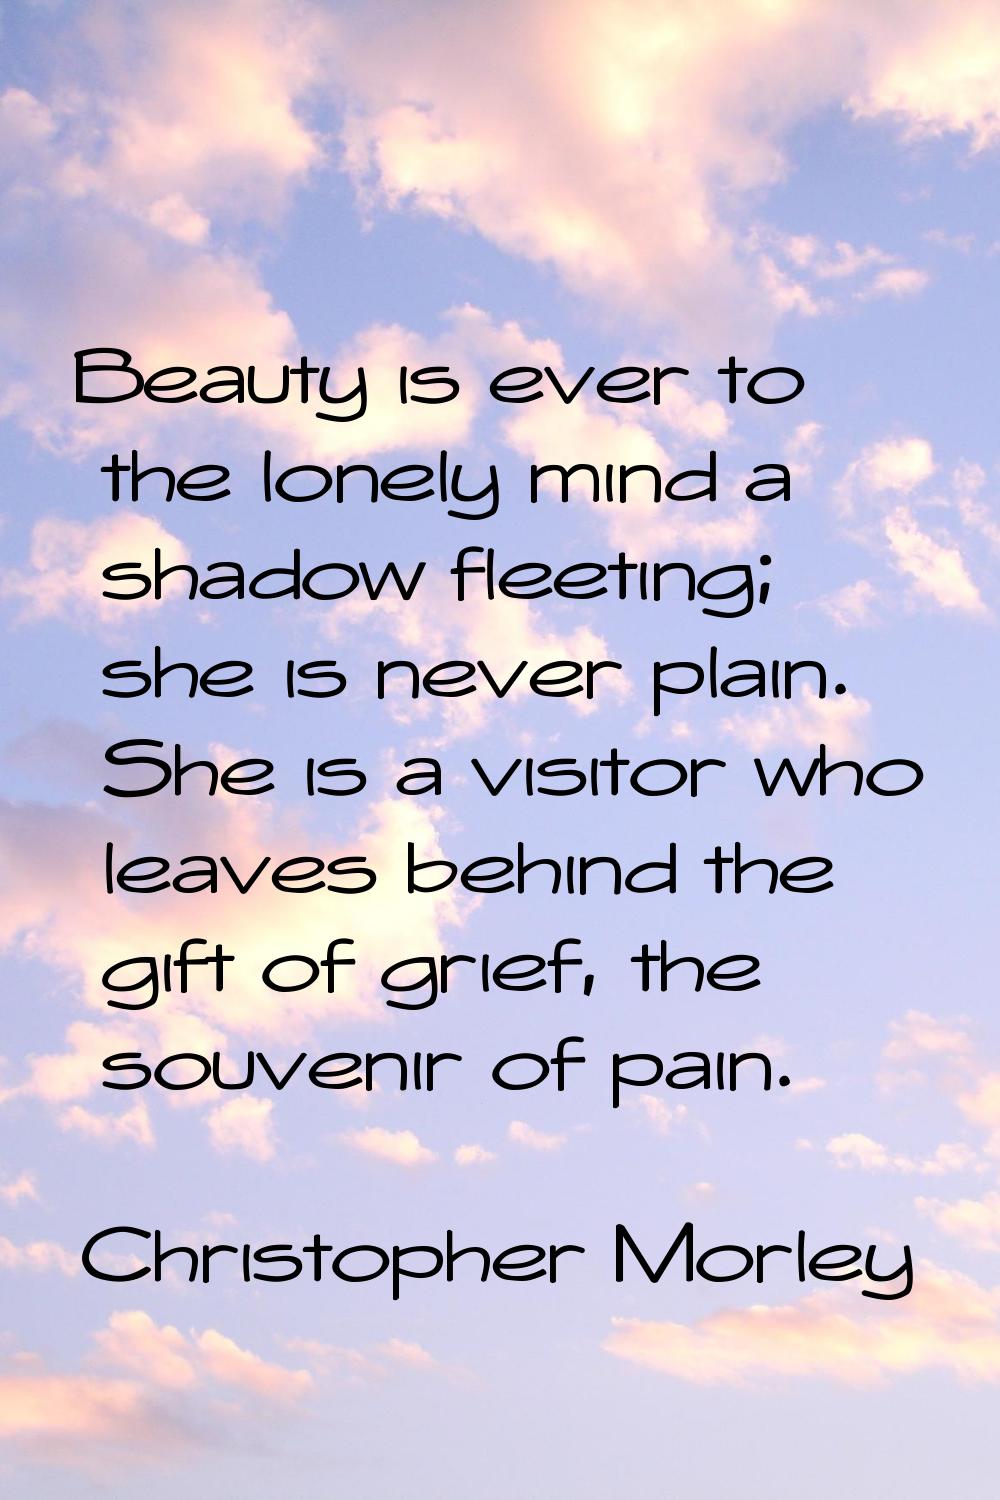 Beauty is ever to the lonely mind a shadow fleeting; she is never plain. She is a visitor who leave